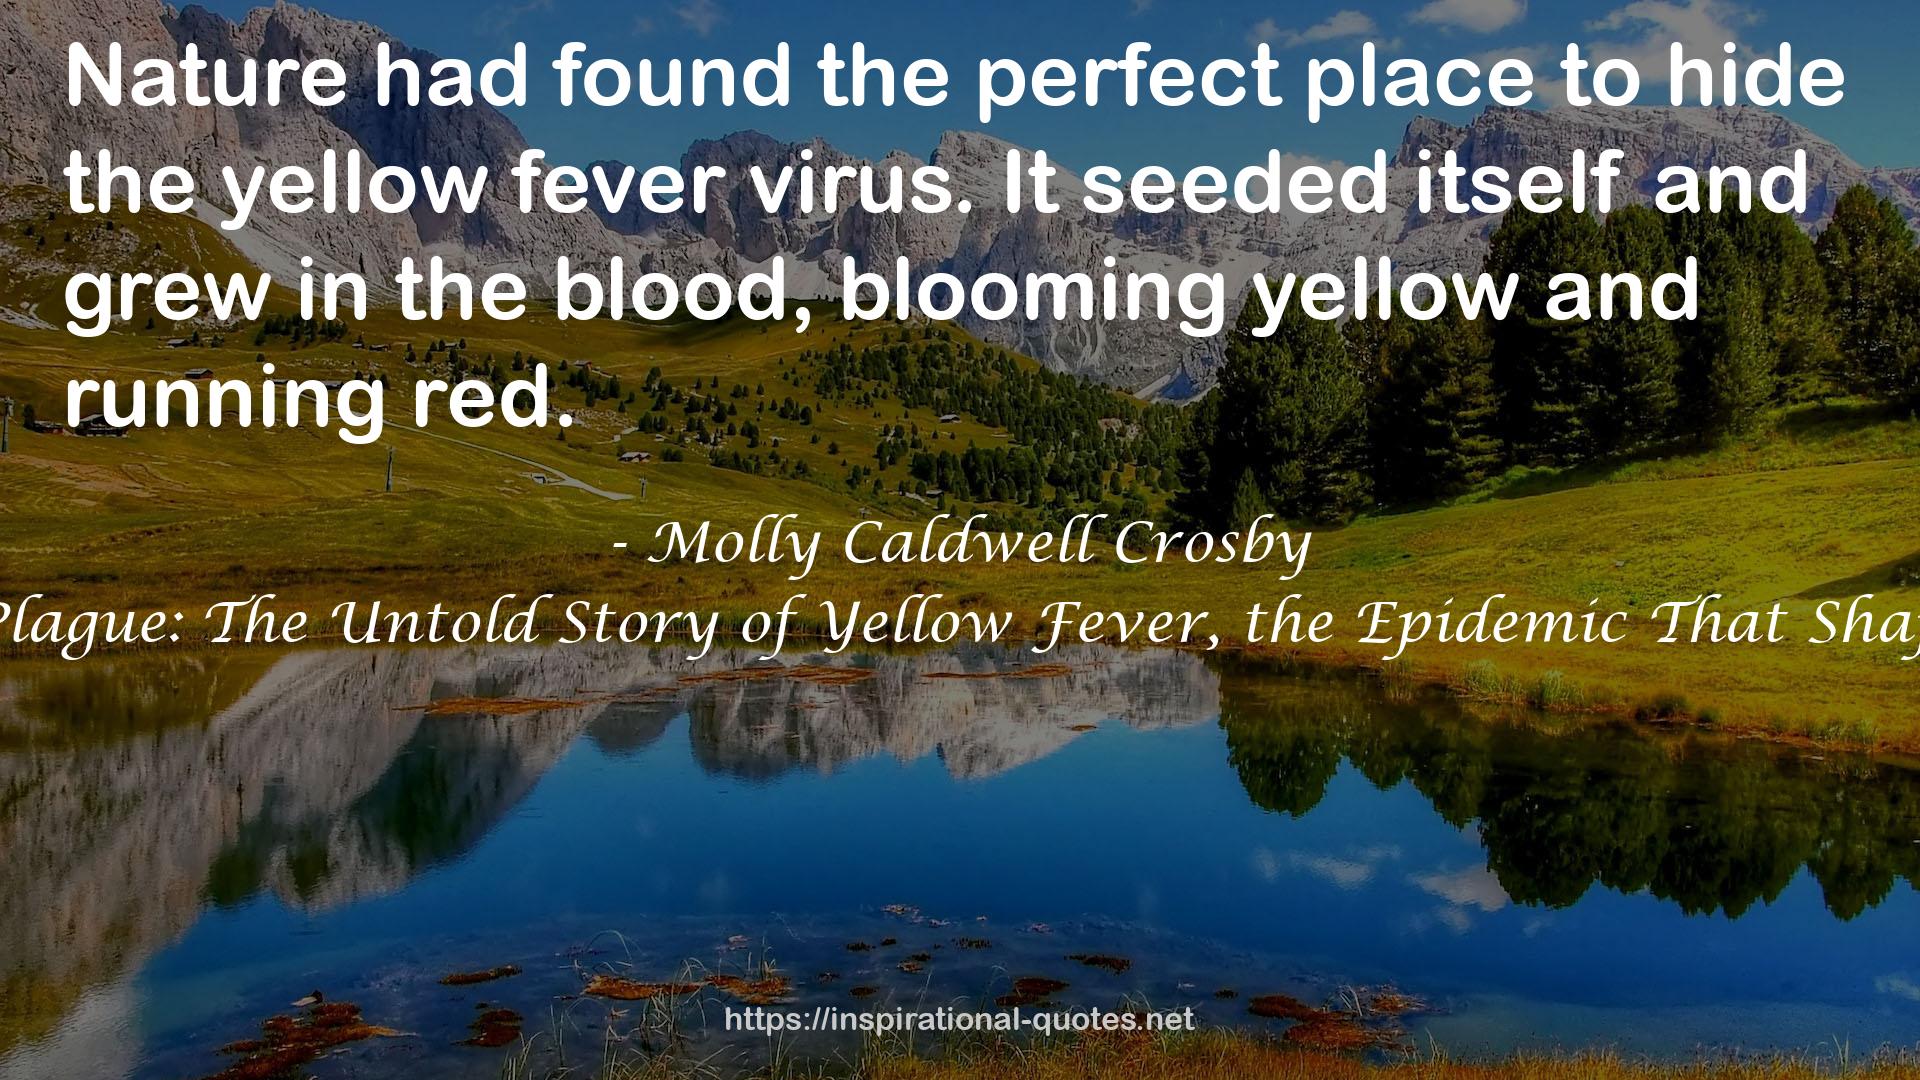 The American Plague: The Untold Story of Yellow Fever, the Epidemic That Shaped Our History QUOTES